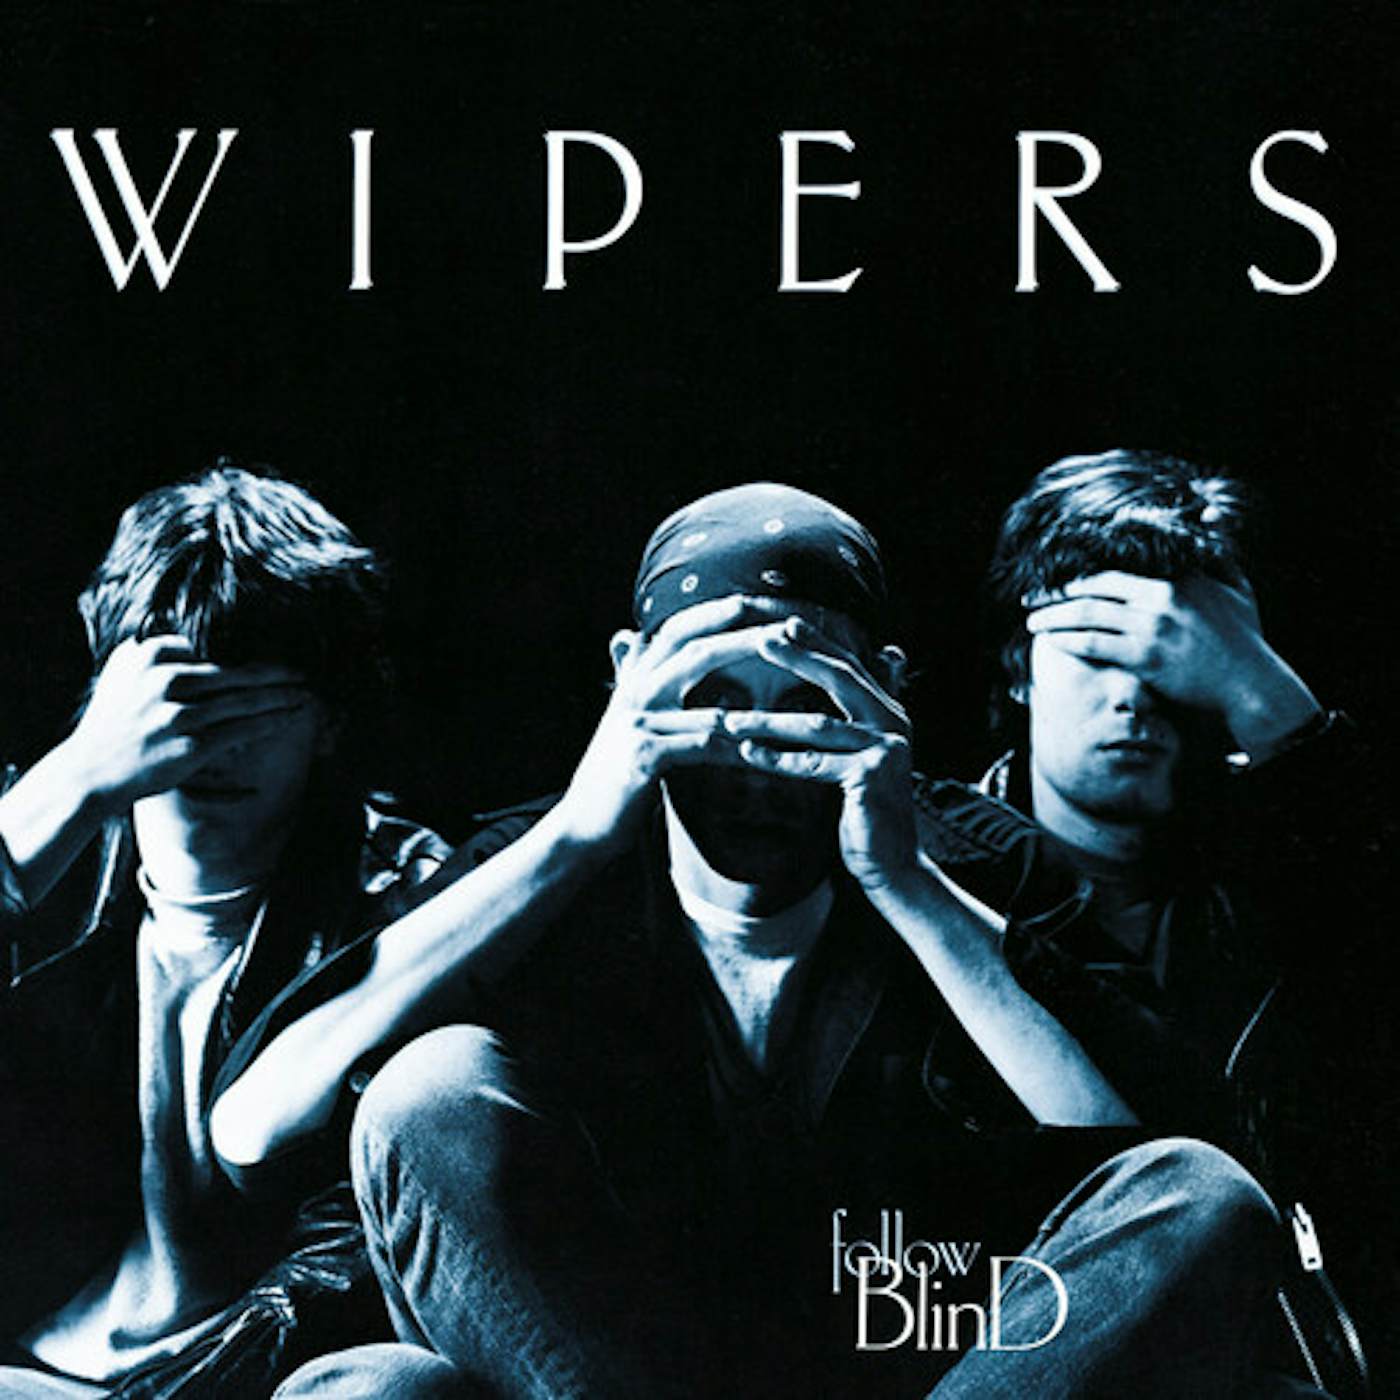 Wipers FOLLOW BLIND CD